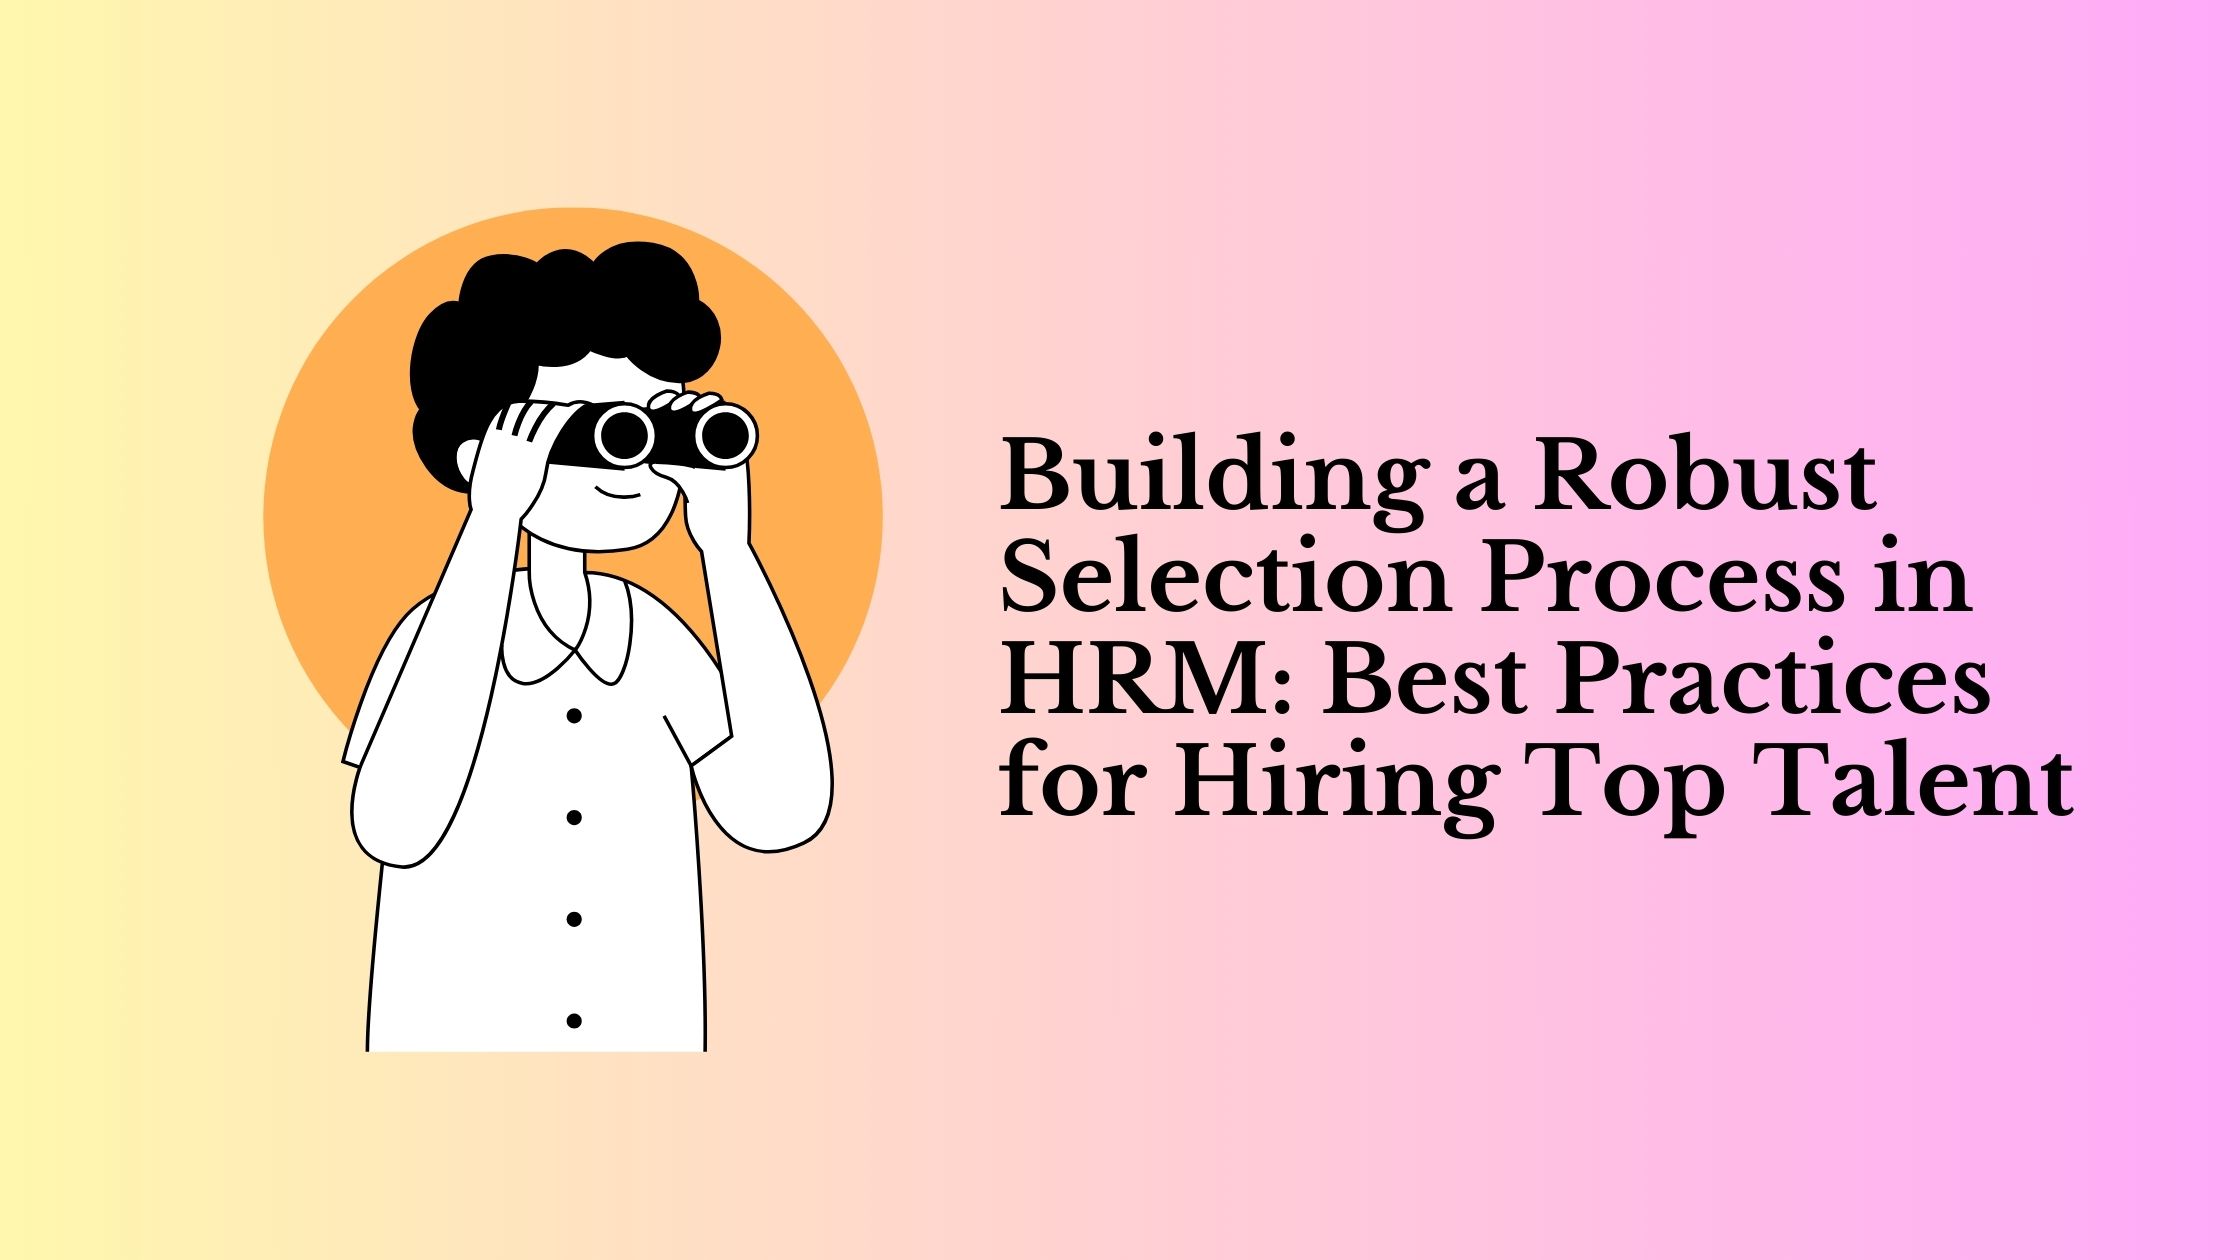 Building a Robust Selection Process in HRM Best Practices for Hiring Top Talent